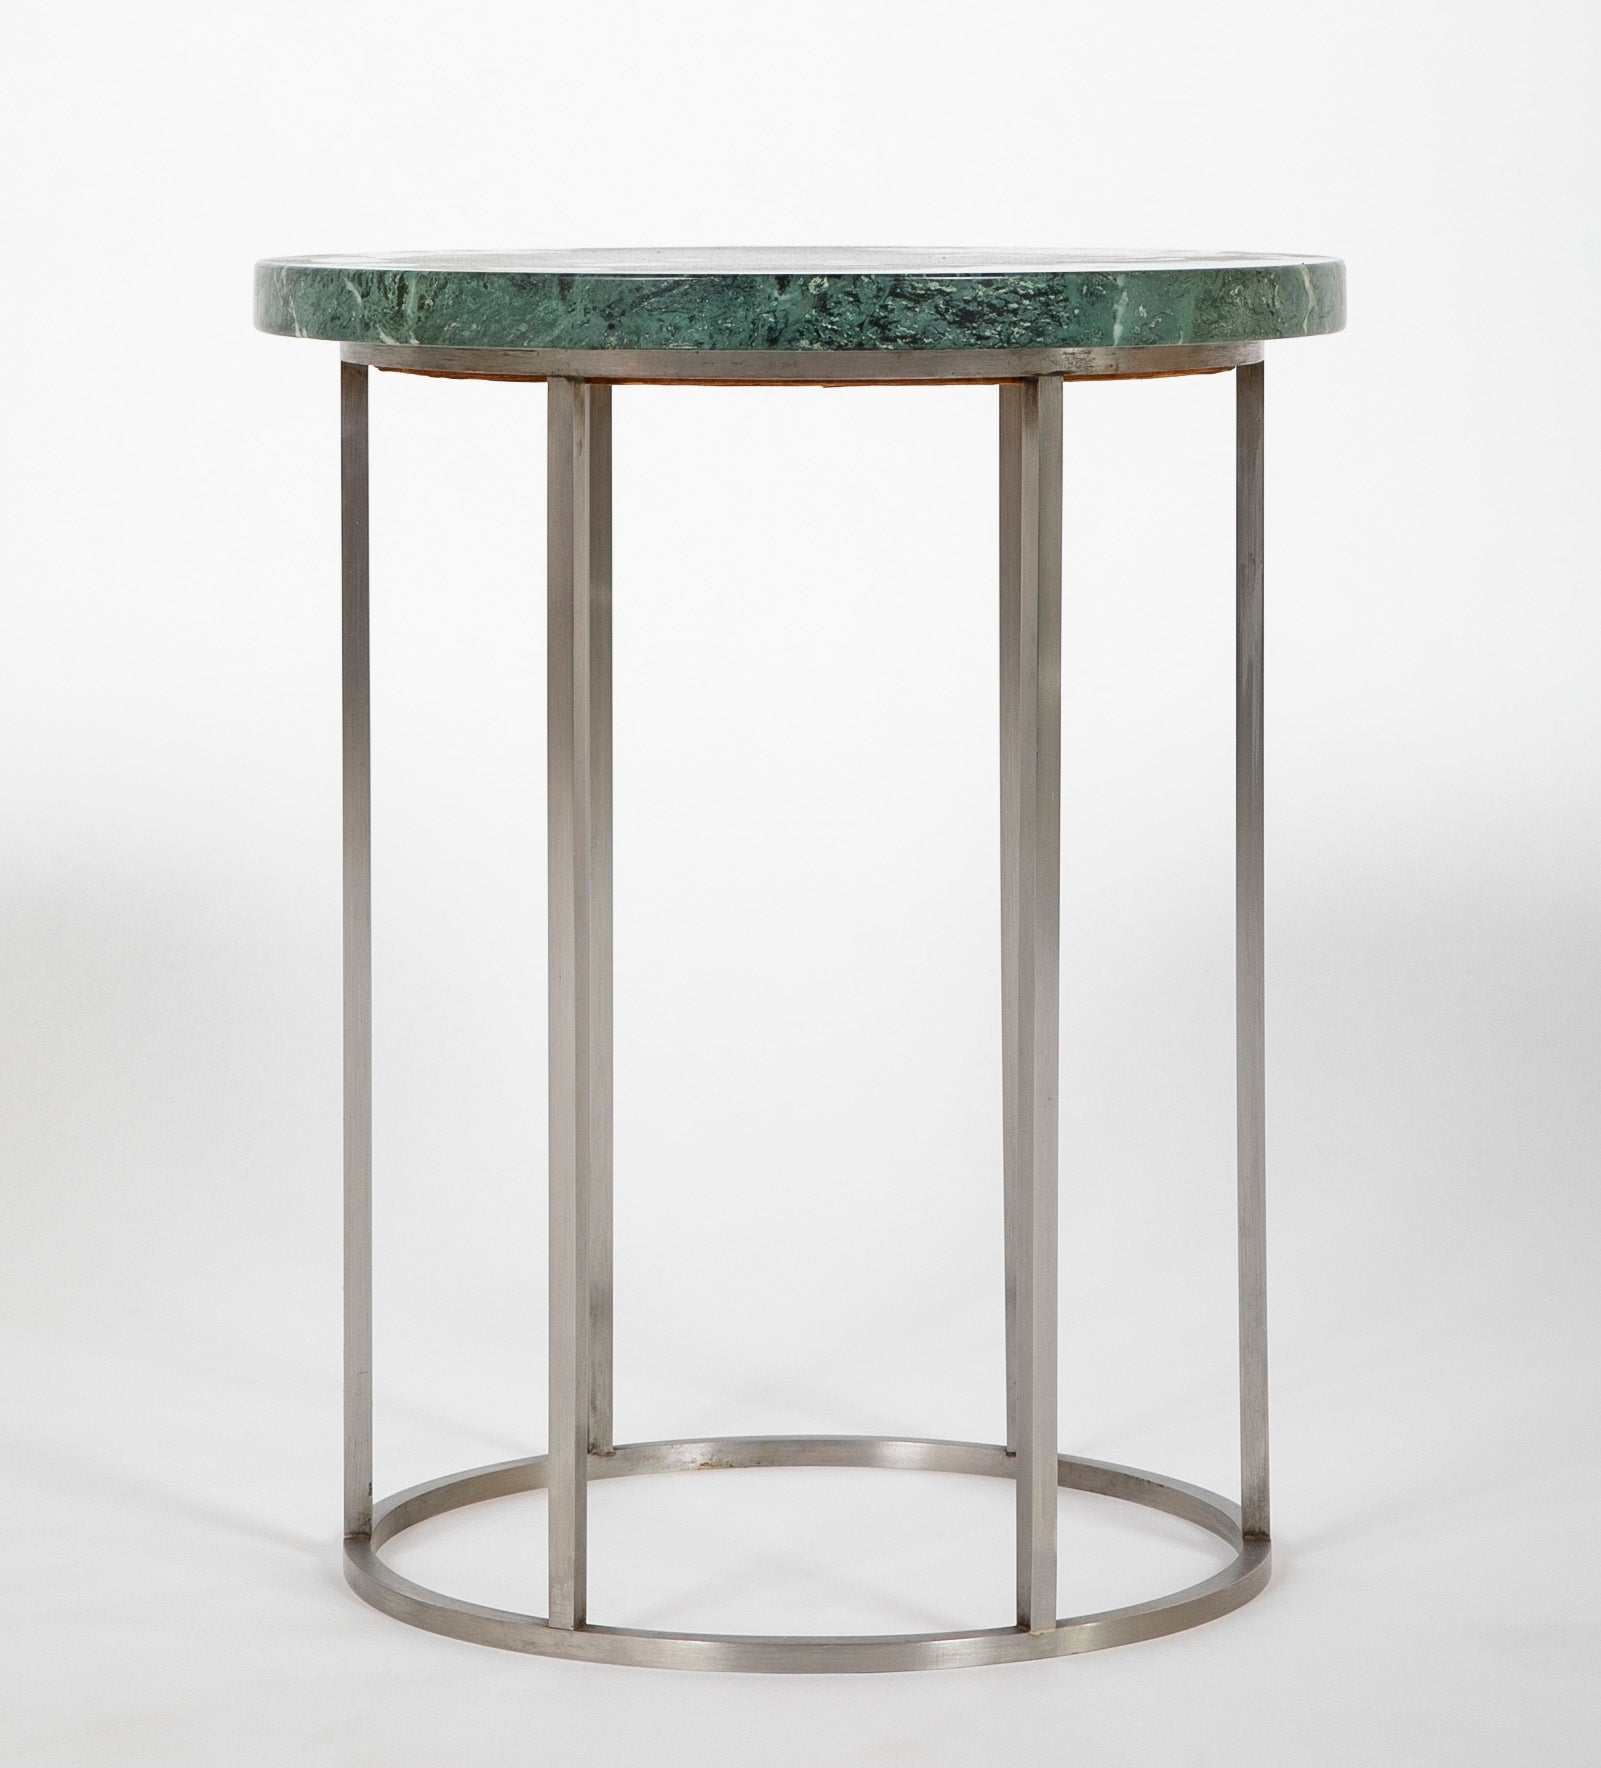 Pair of Late 20th Century Green Marble Top Brushed Aluminum Side Tables